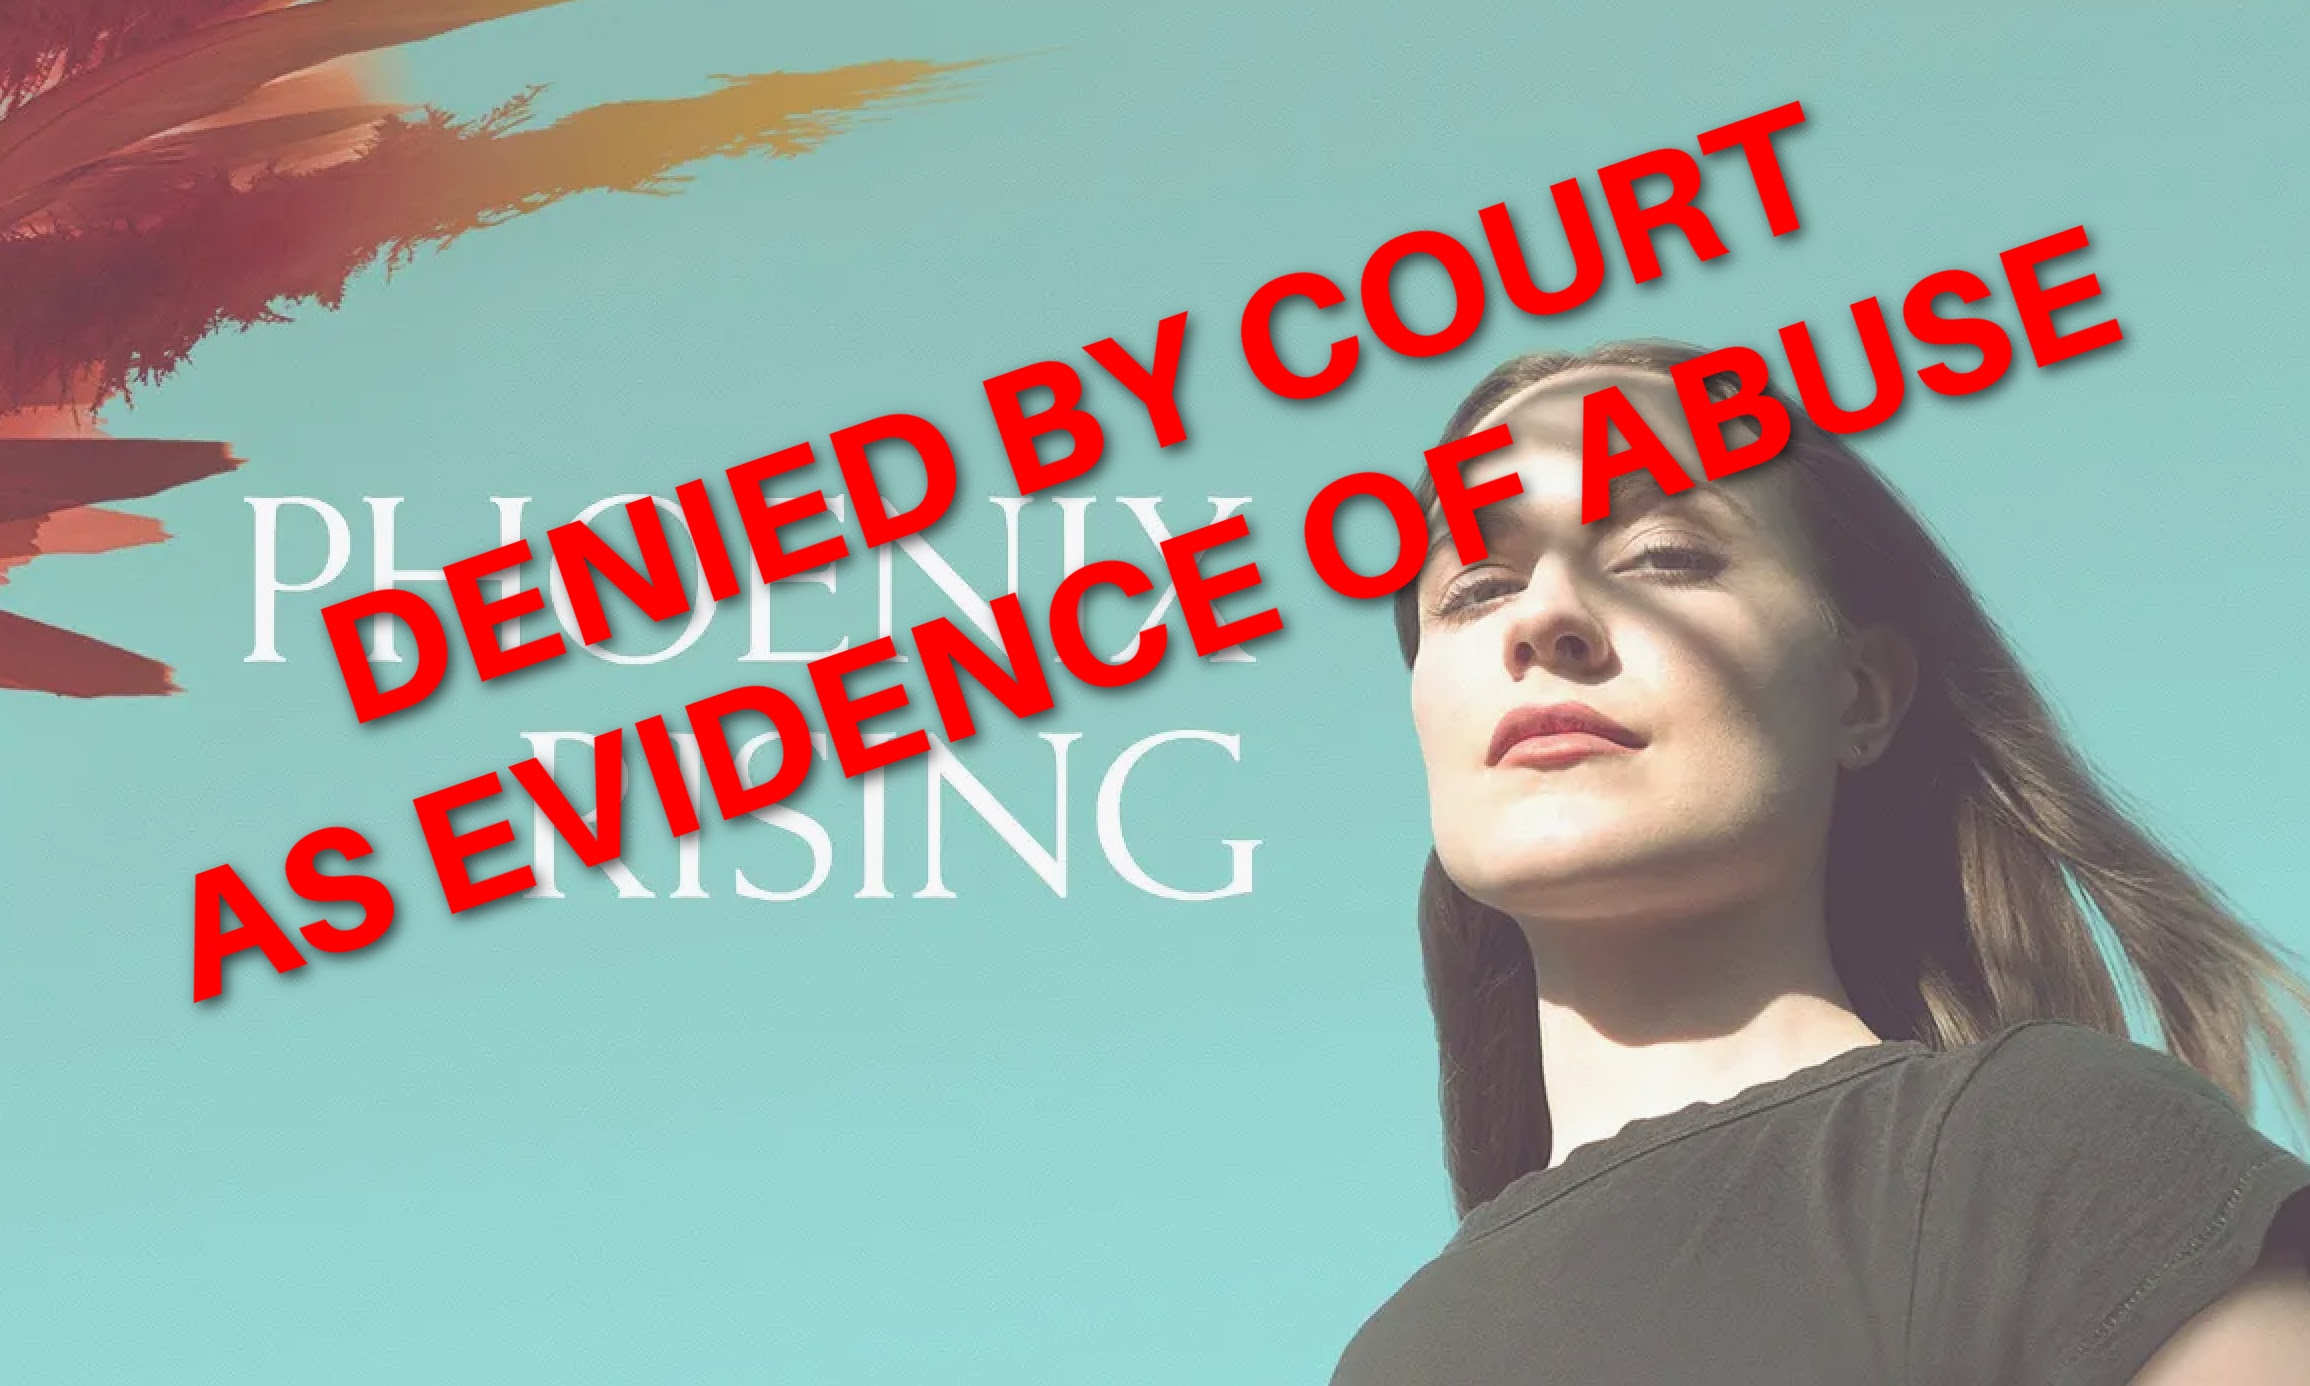 Marilyn Manson Abuse Hoax Conspiracy Breakdown I Evan Rachel Wood and Amy Berg's "Phoenix Rising" was rejected as evidence of abuse by LA County Superior Court.